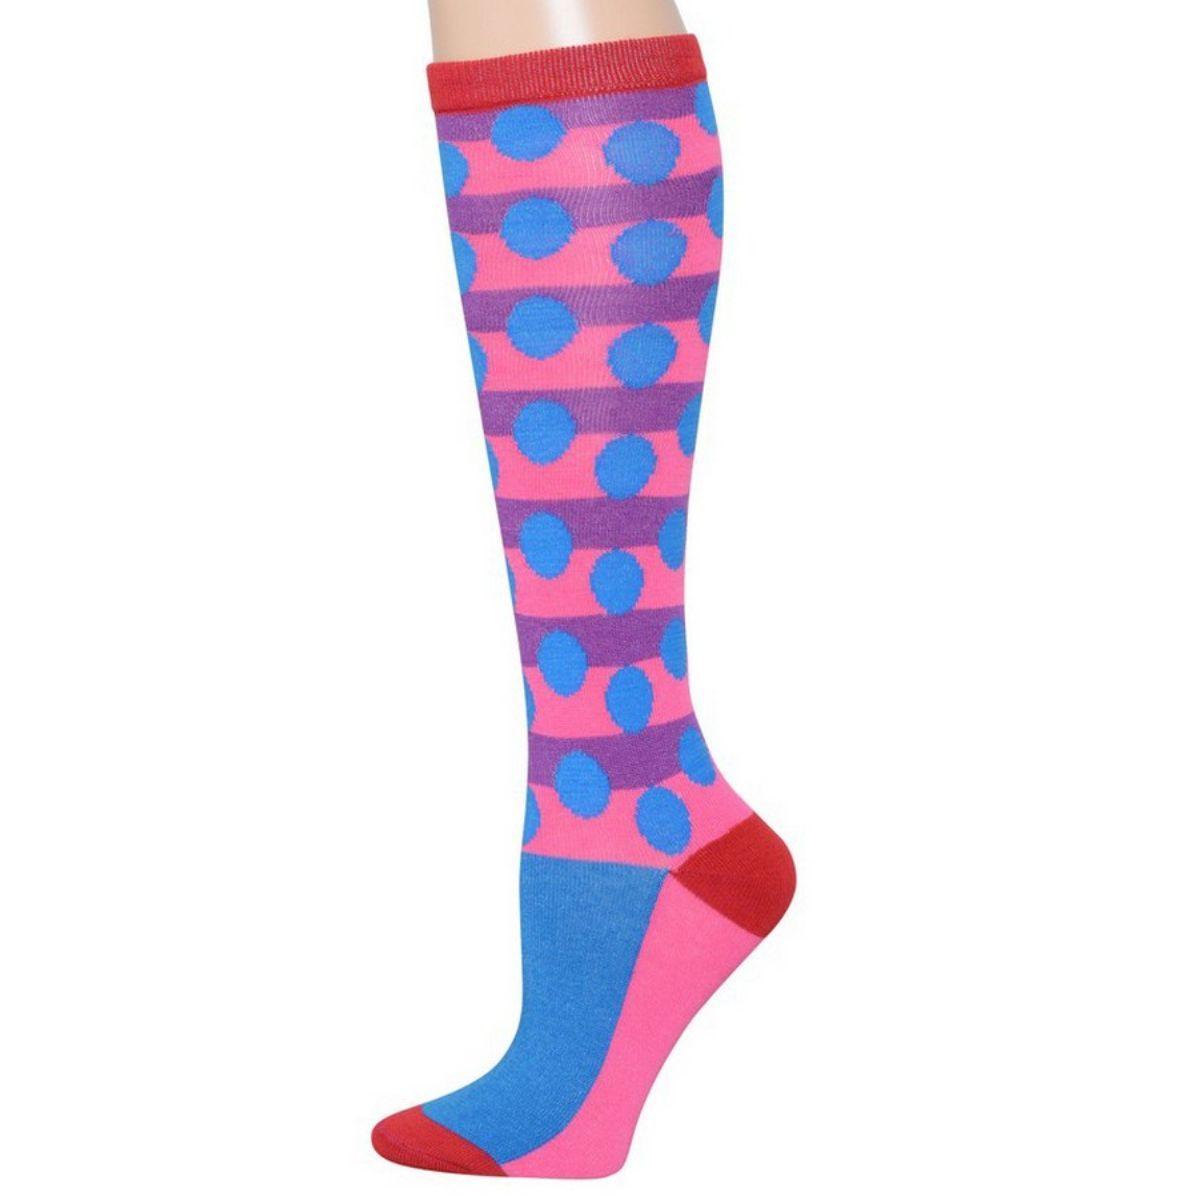 Unleash Your Playful Side with Trendy Women's Pink Knee High Socks - Blue Polka Dot Delight!